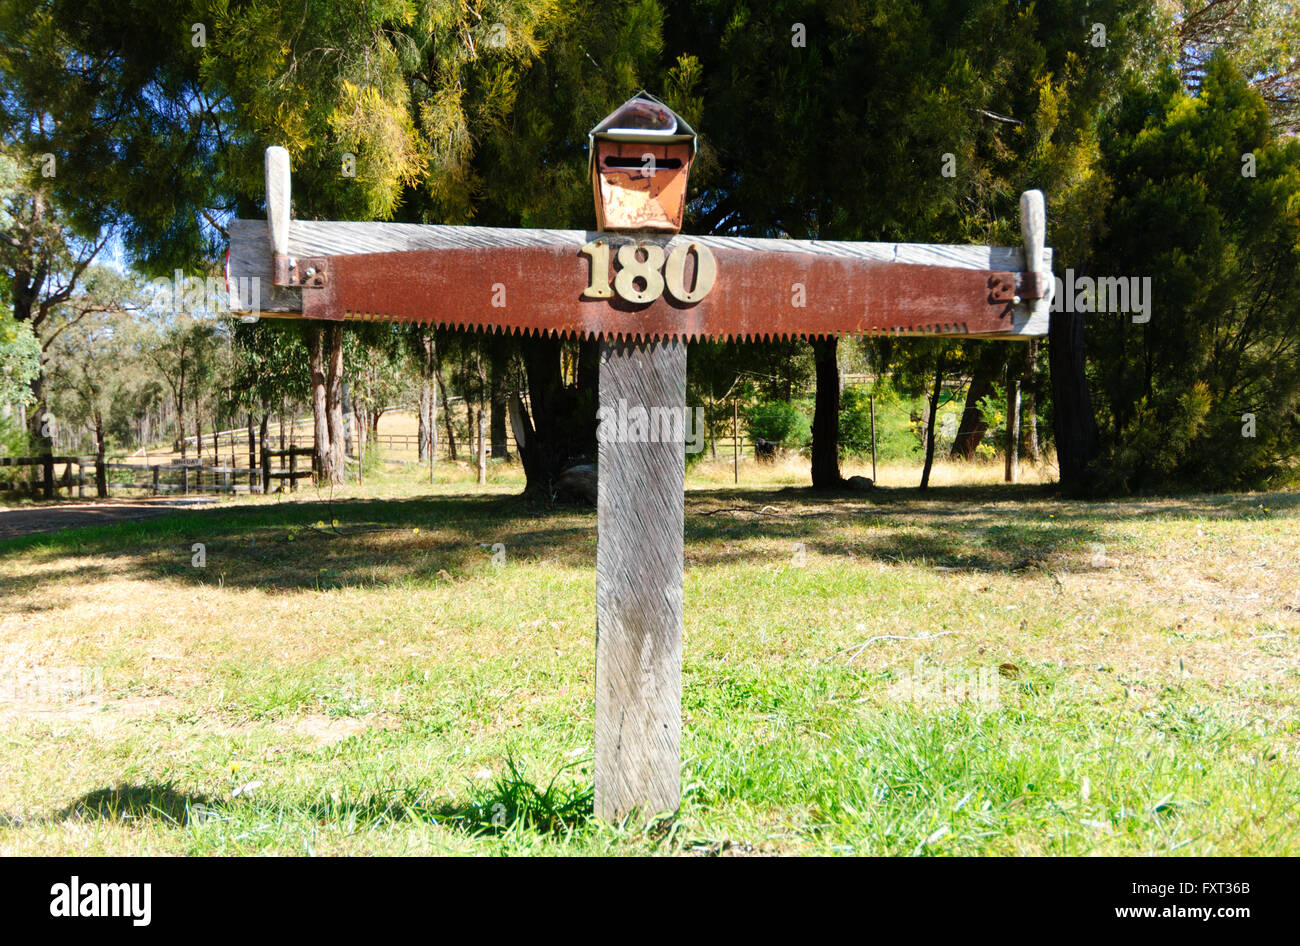 Letterbox in the shape of a wood saw, Australia Stock Photo